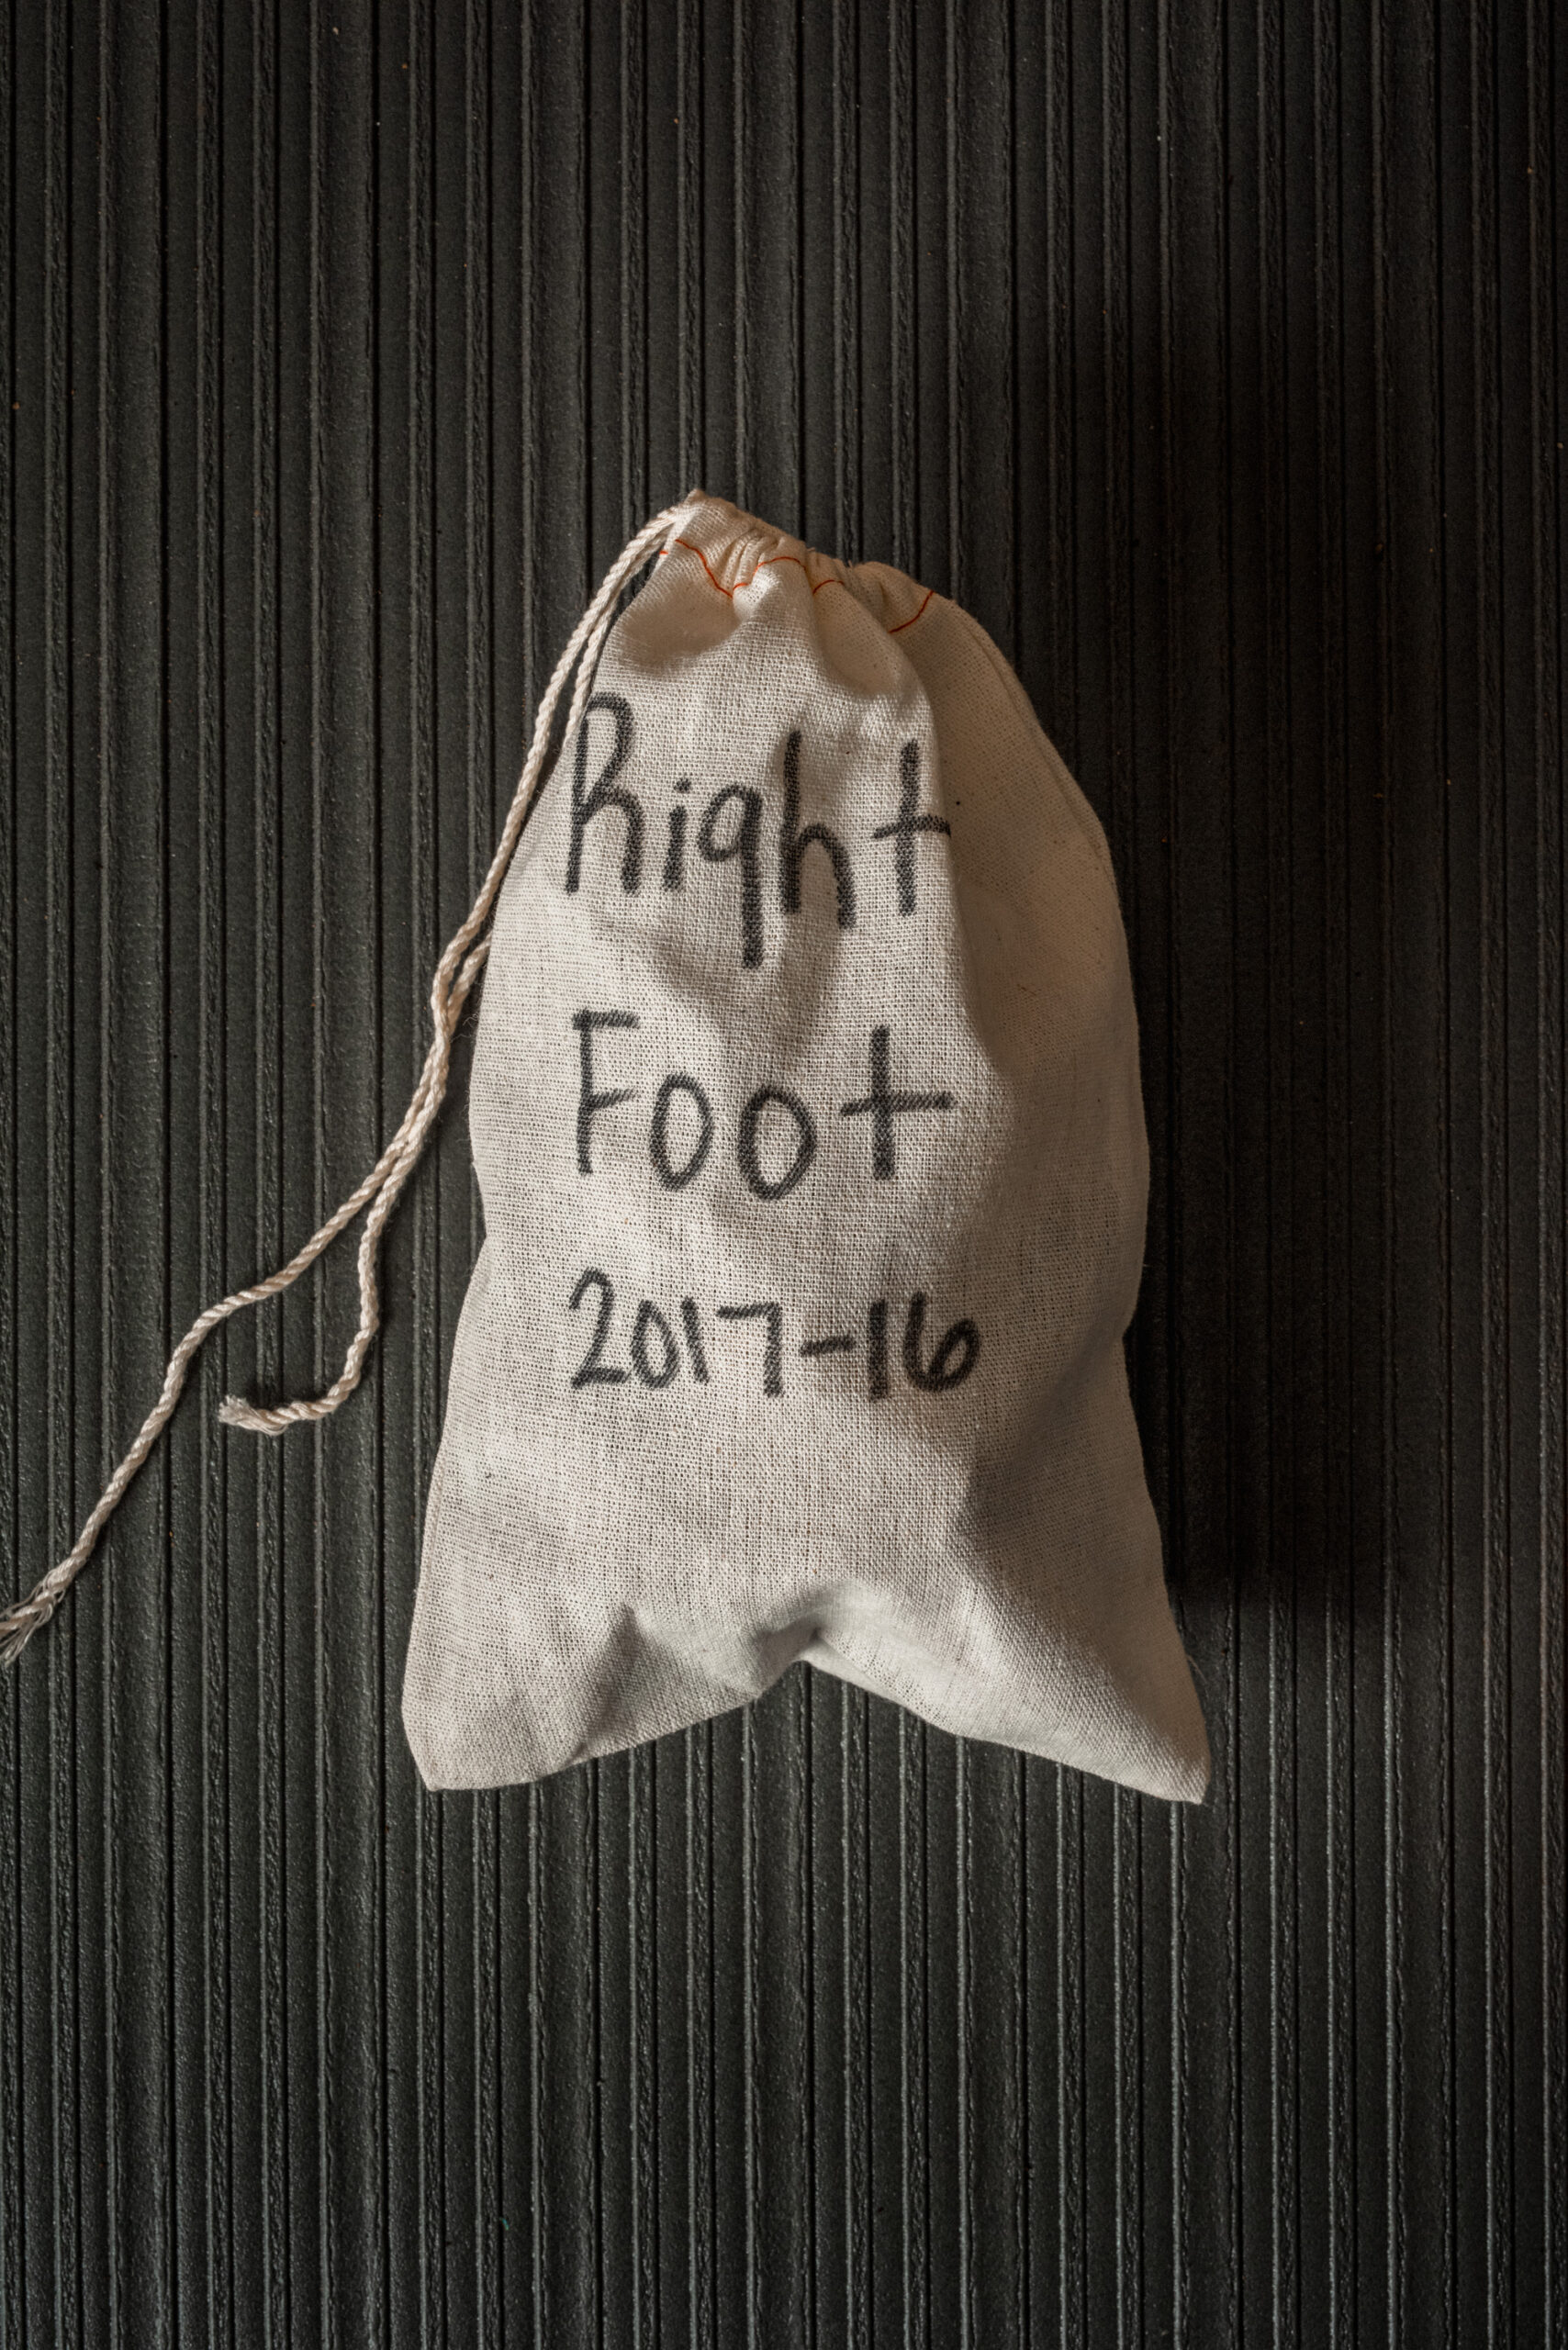 overhead view of a pouch with the words "Right Foot 2017-16" handwritten on the fabric in marker